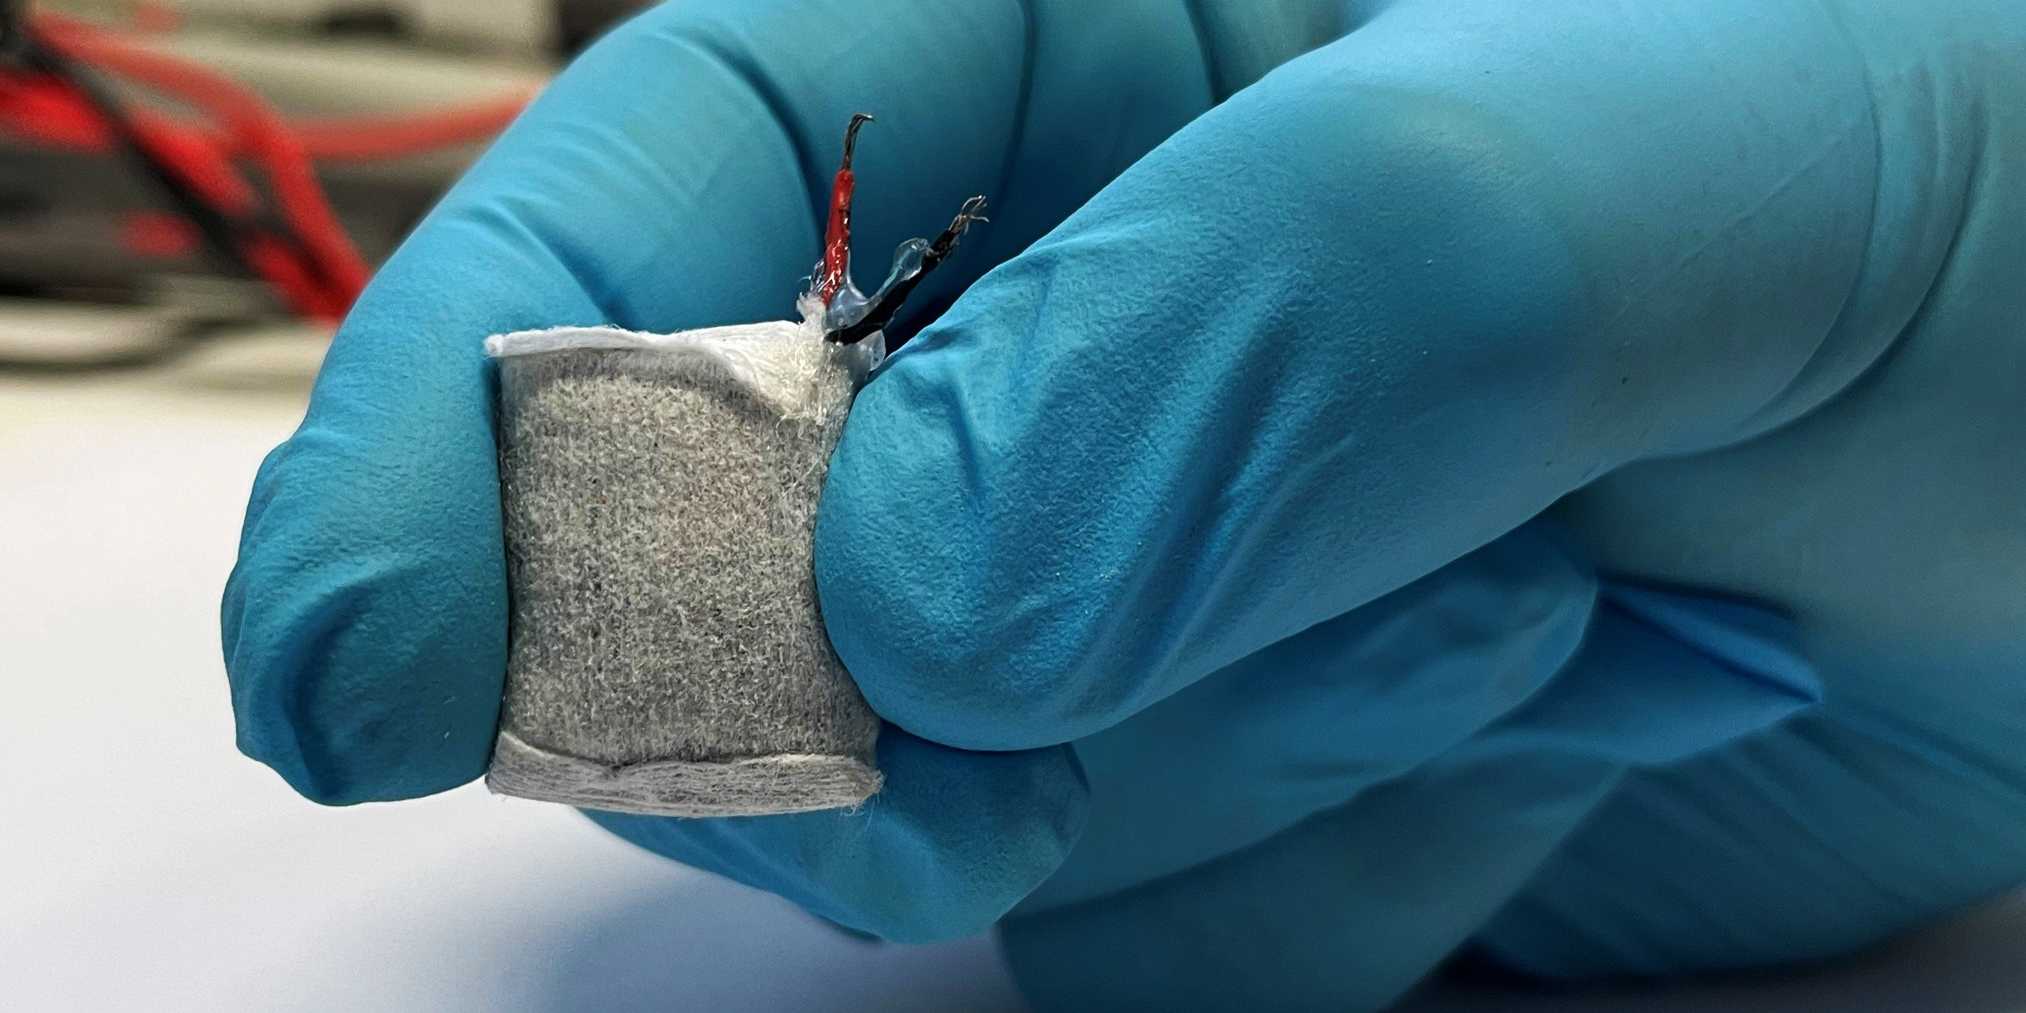 This Implantable Fuel Cell Converts Blood Sugar into Electrical Energy to Power Medical Implants and Also Treat Diabetes